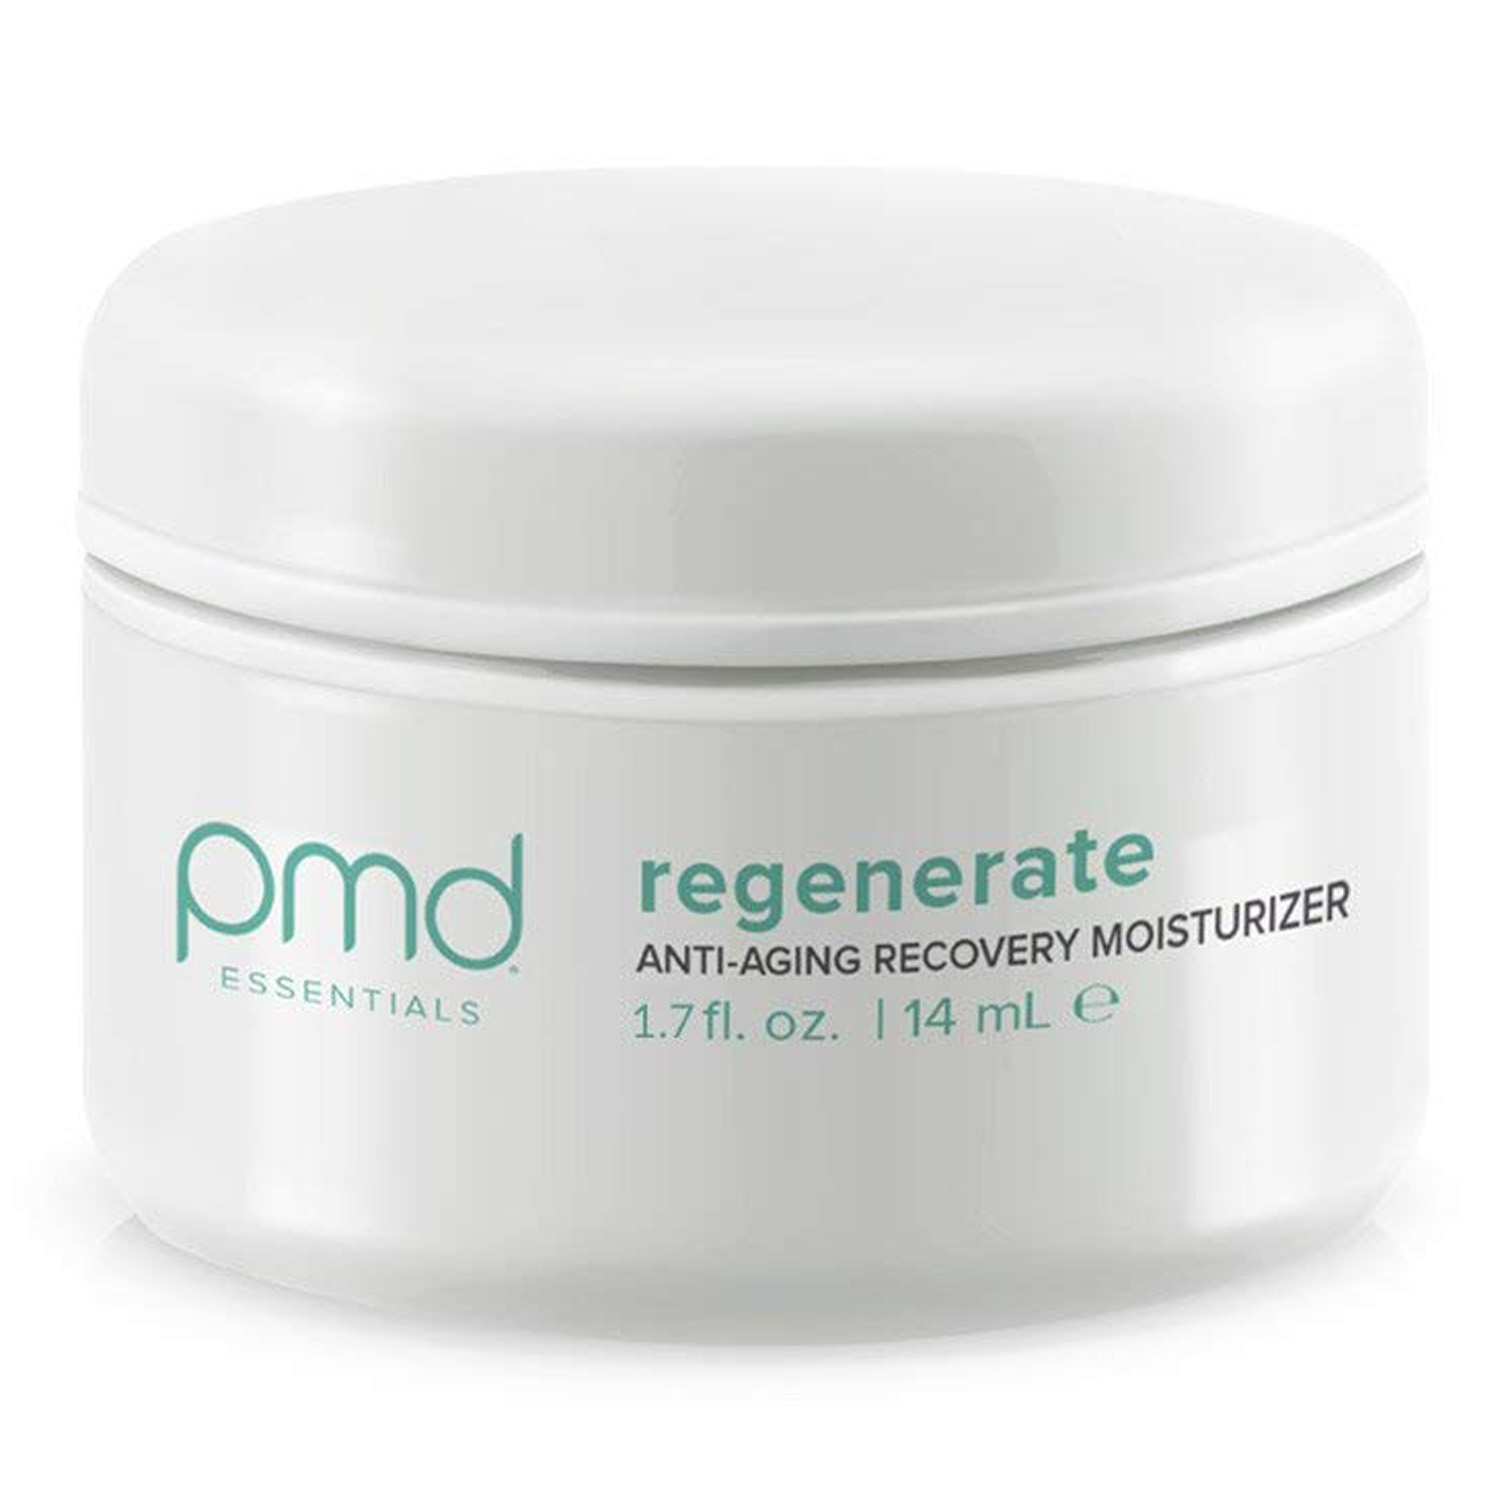 pmd beauty personal microderm pro